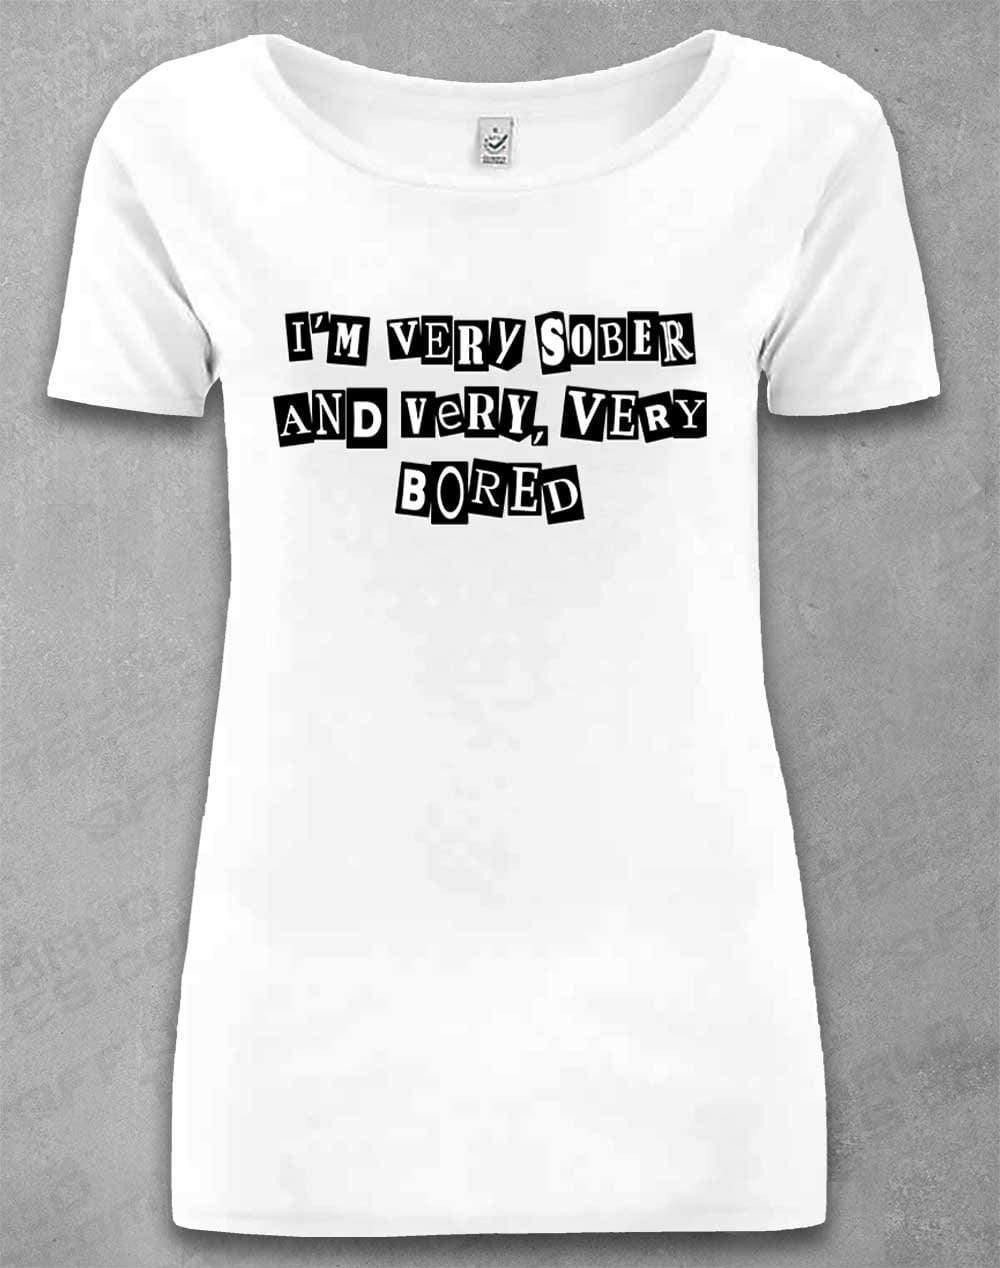 DELUXE I'm Very Sober and Very Very Bored Organic Scoop Neck T-Shirt 8-10 / White  - Off World Tees